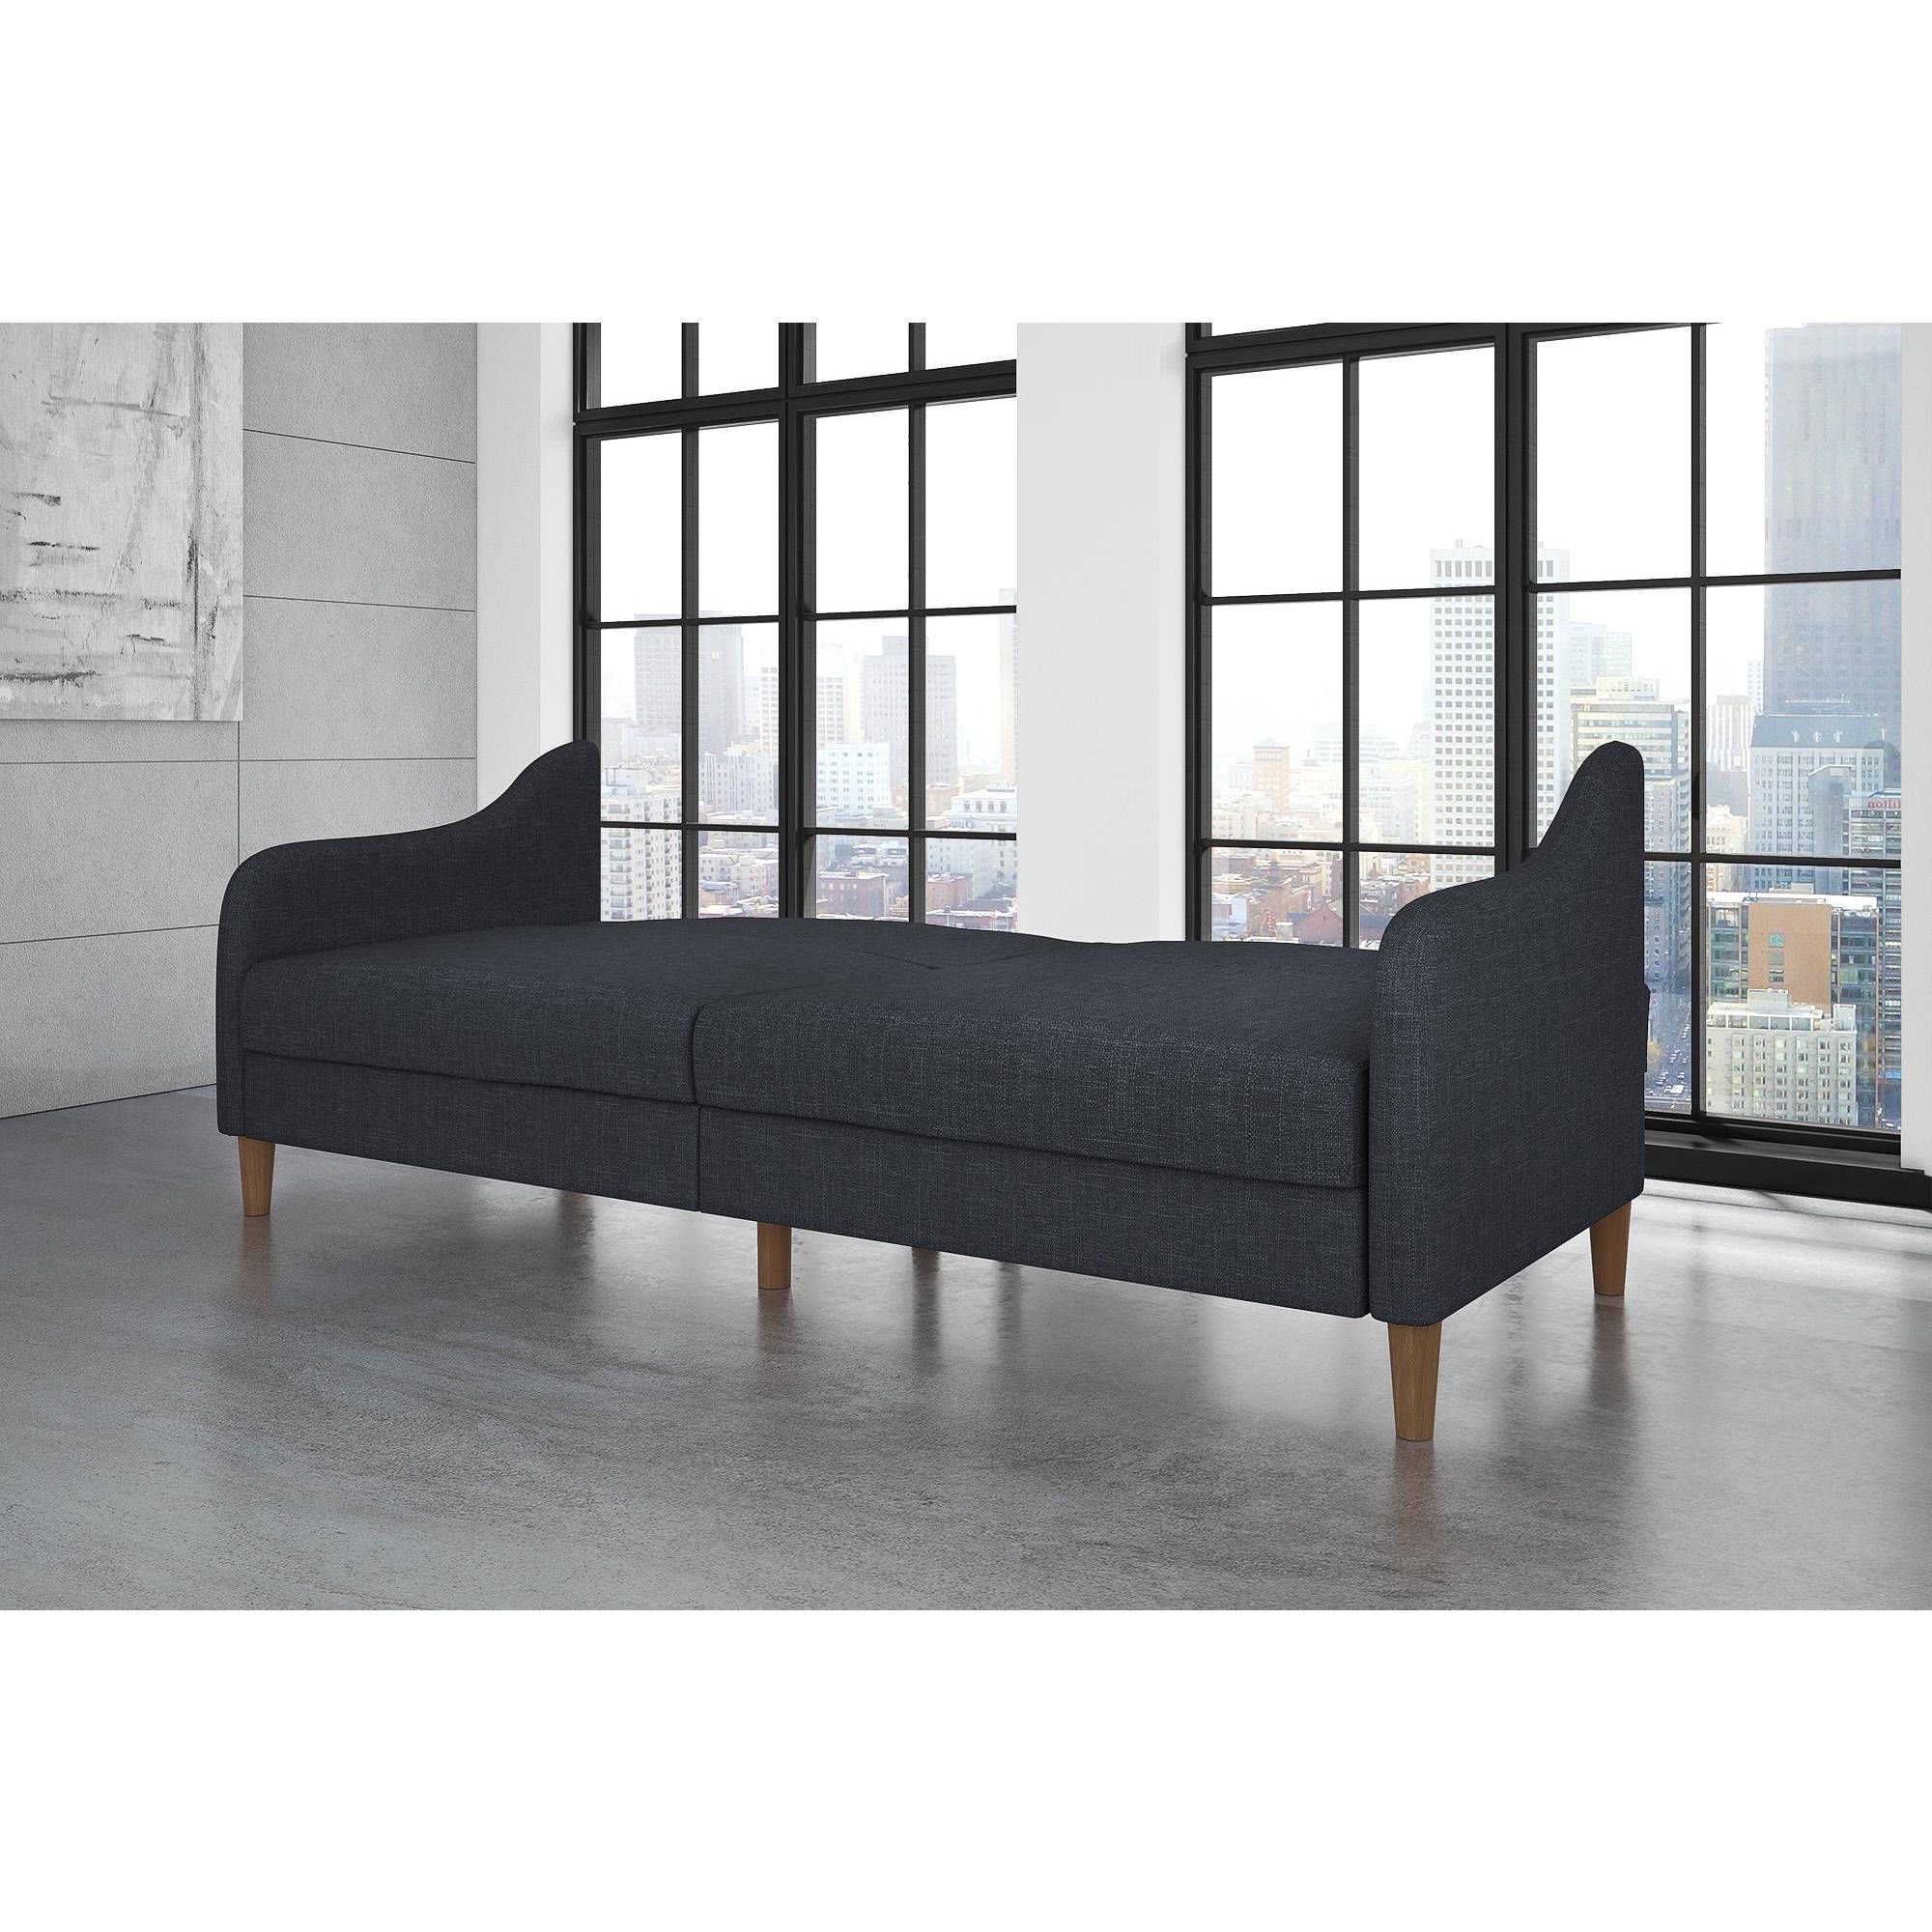 Convertible Jasper Coil Sofa Sleeper Futon Navy Linen Upholstery Couch With Navy Linen Coil Sofas (Gallery 1 of 20)